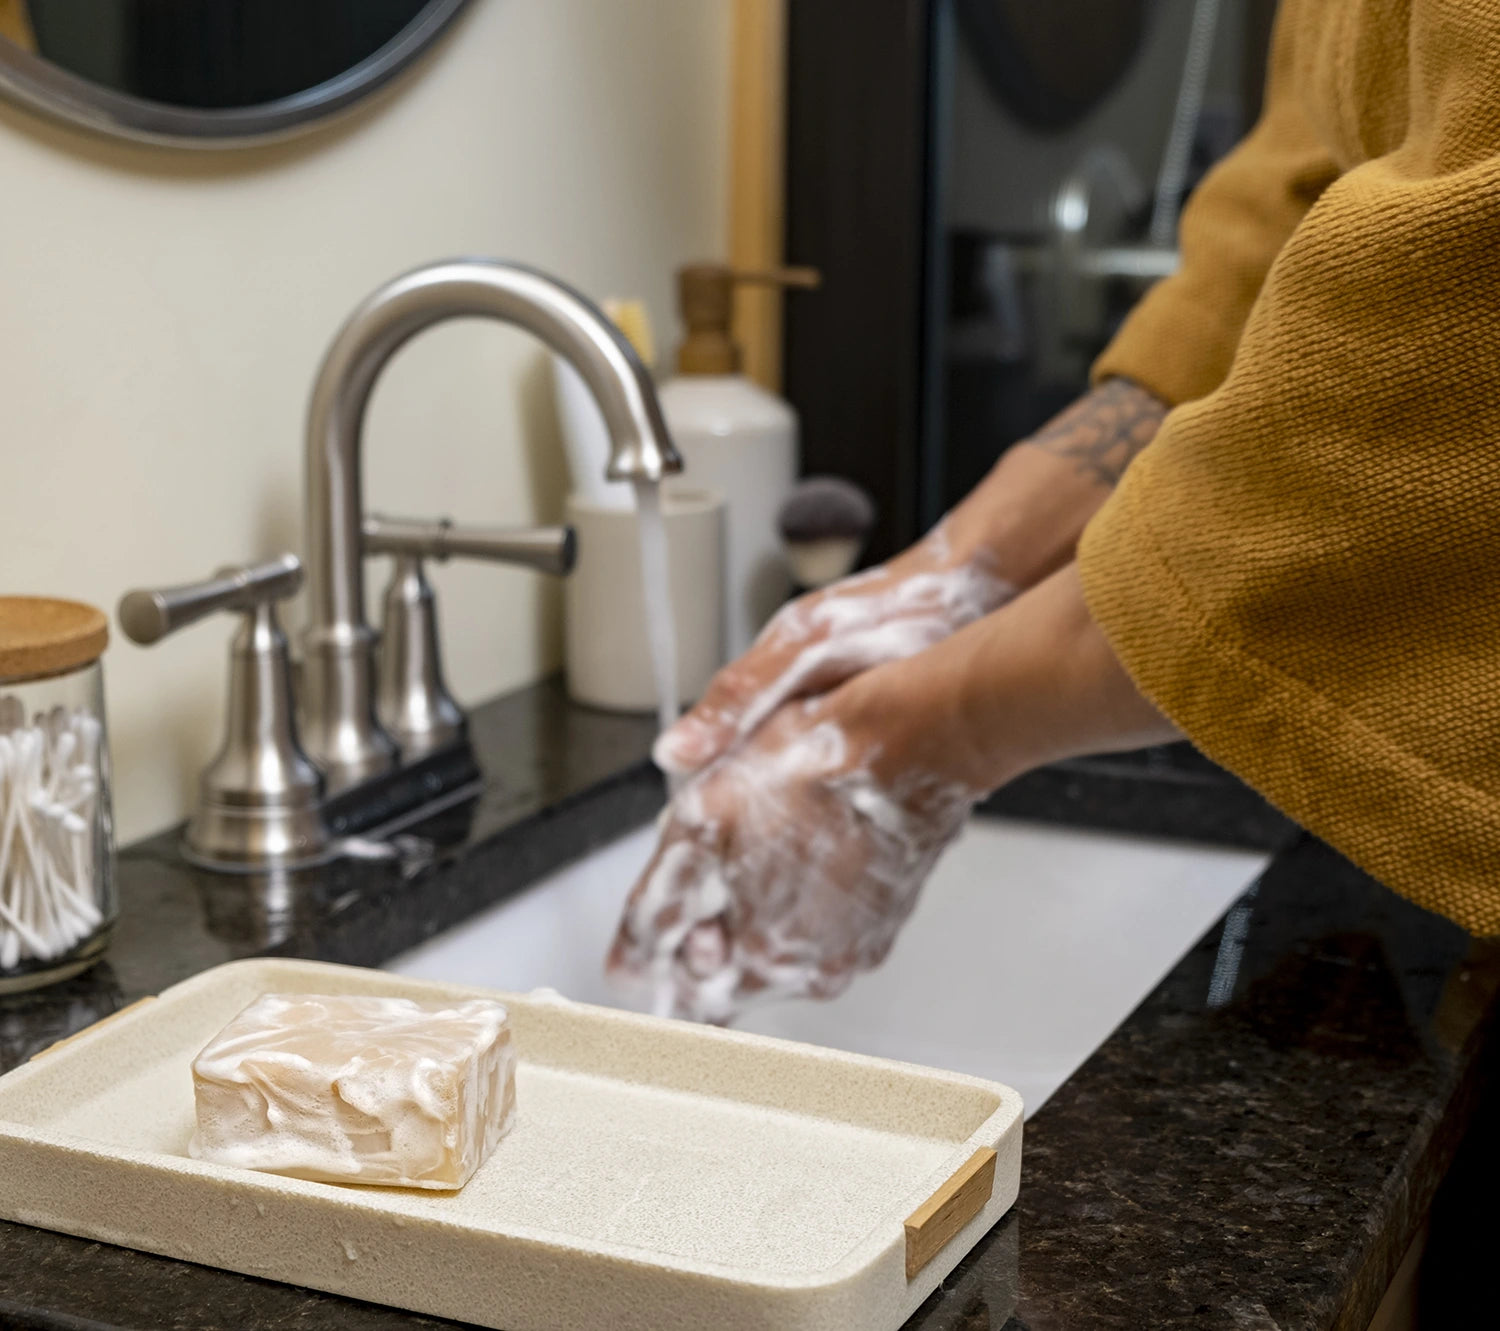 Man's hands lathered up with Man Bar soap at a sink